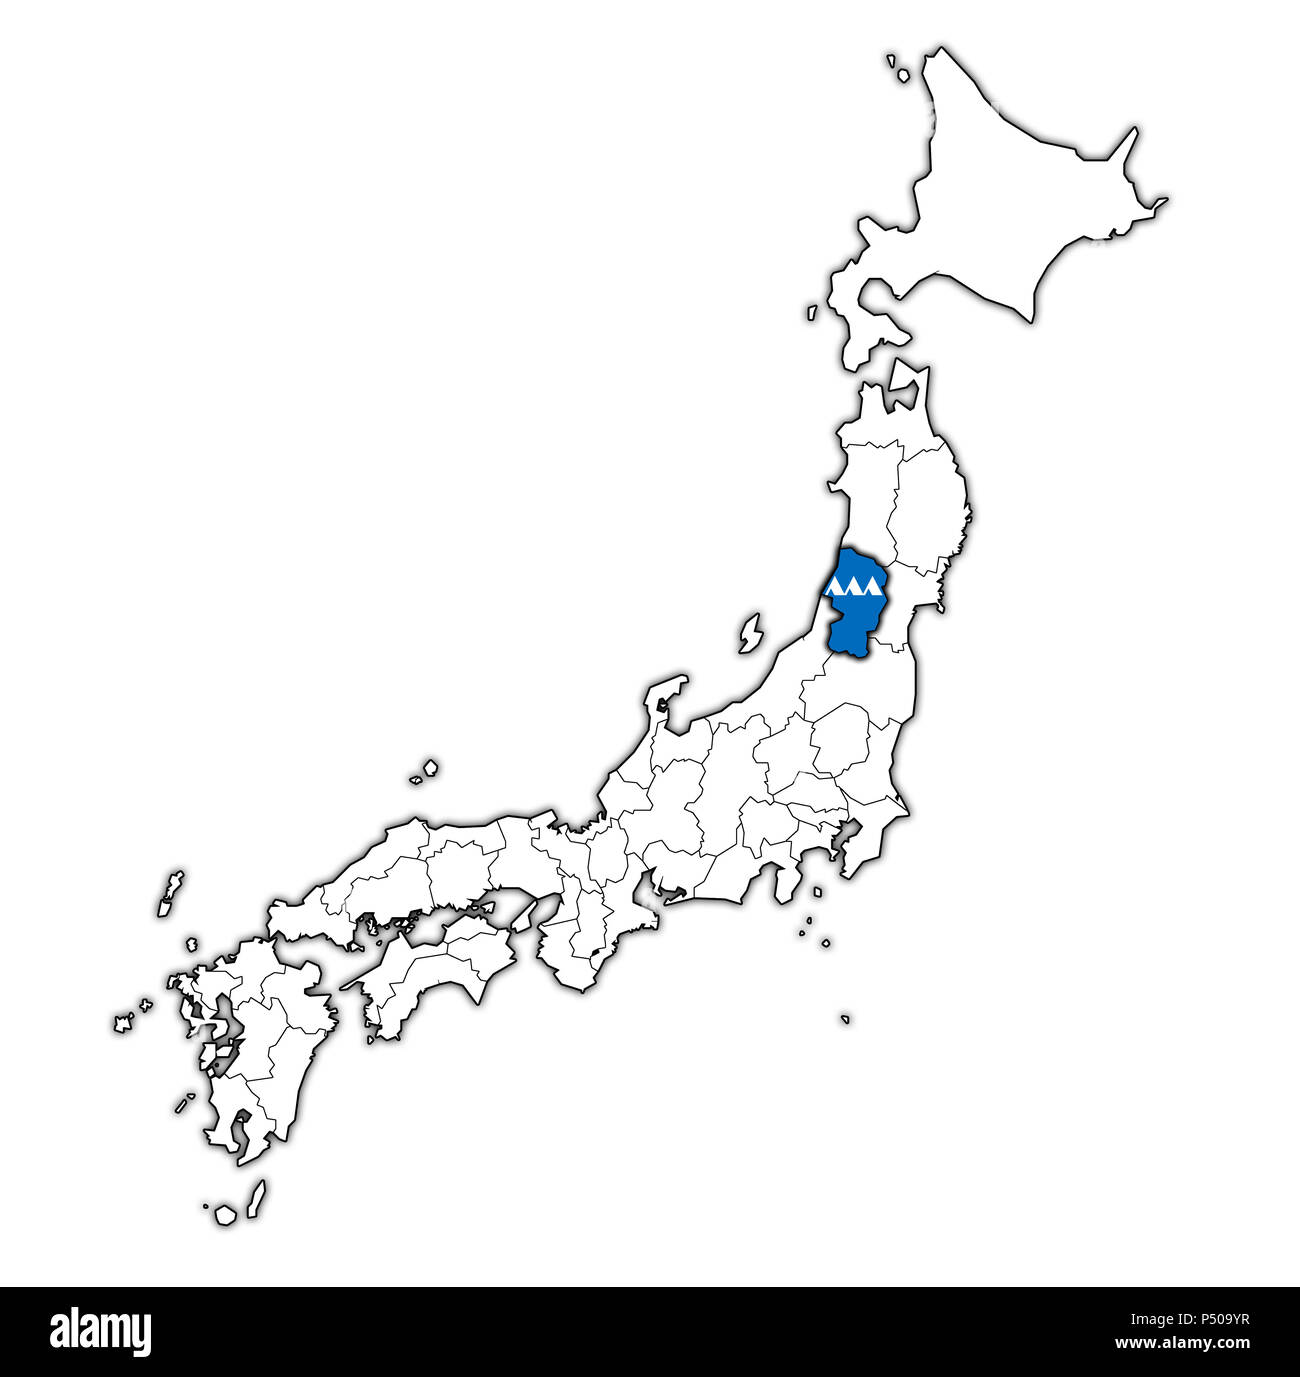 flag of yamagata prefecture on map with administrative divisions and borders of japan Stock Photo